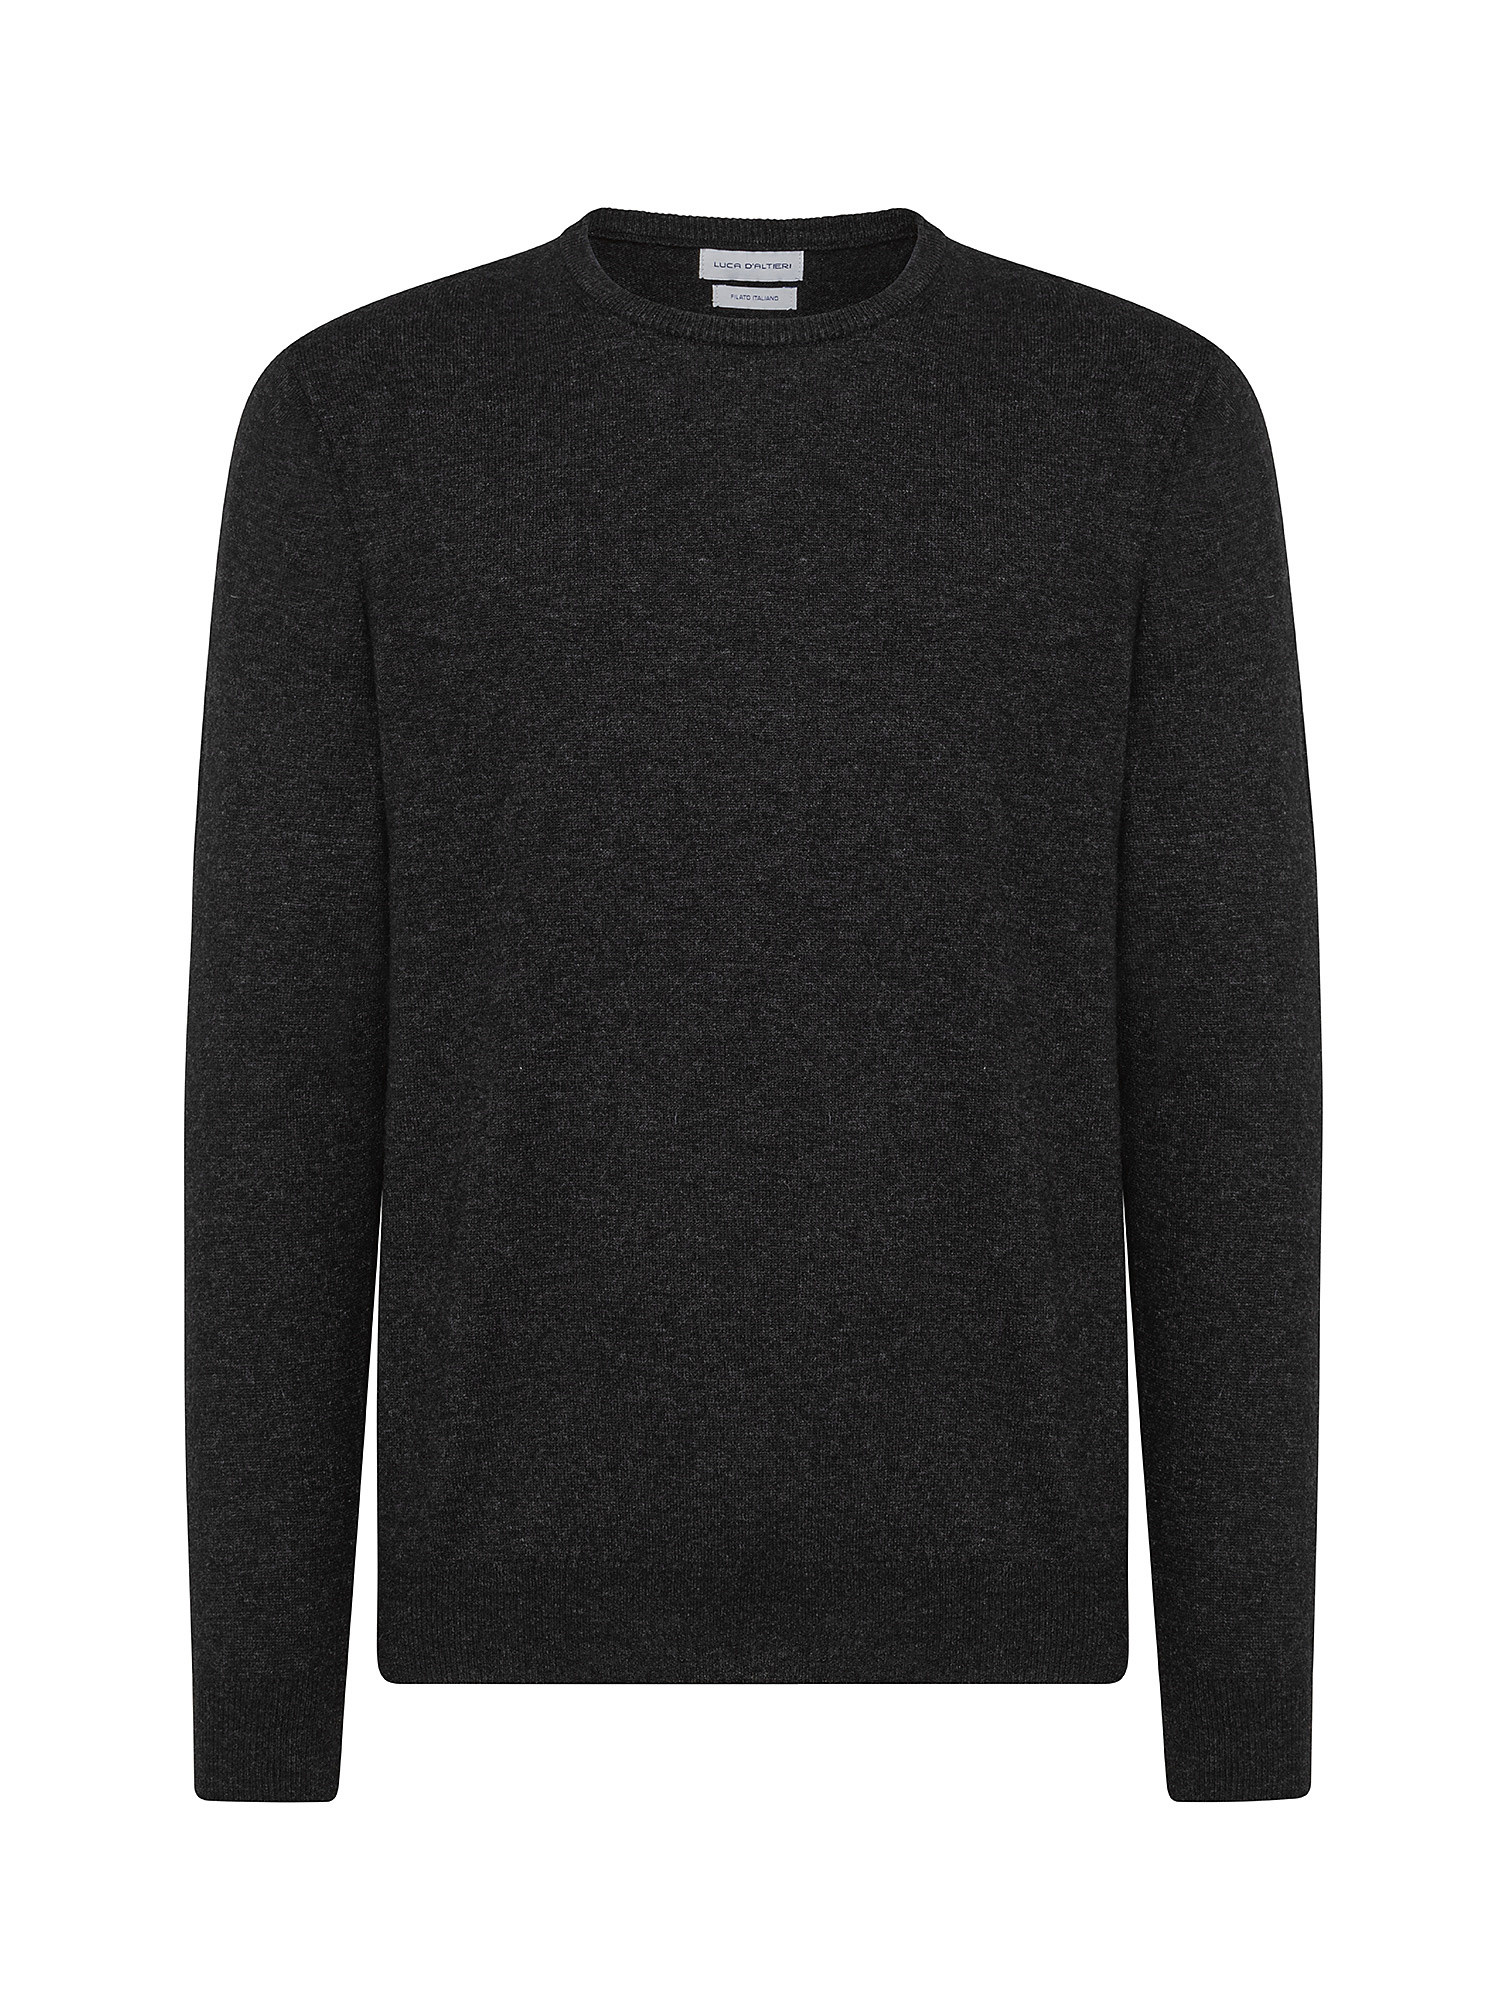 Cashmere Blend crewneck sweater with noble fibers, Anthracite, large image number 0